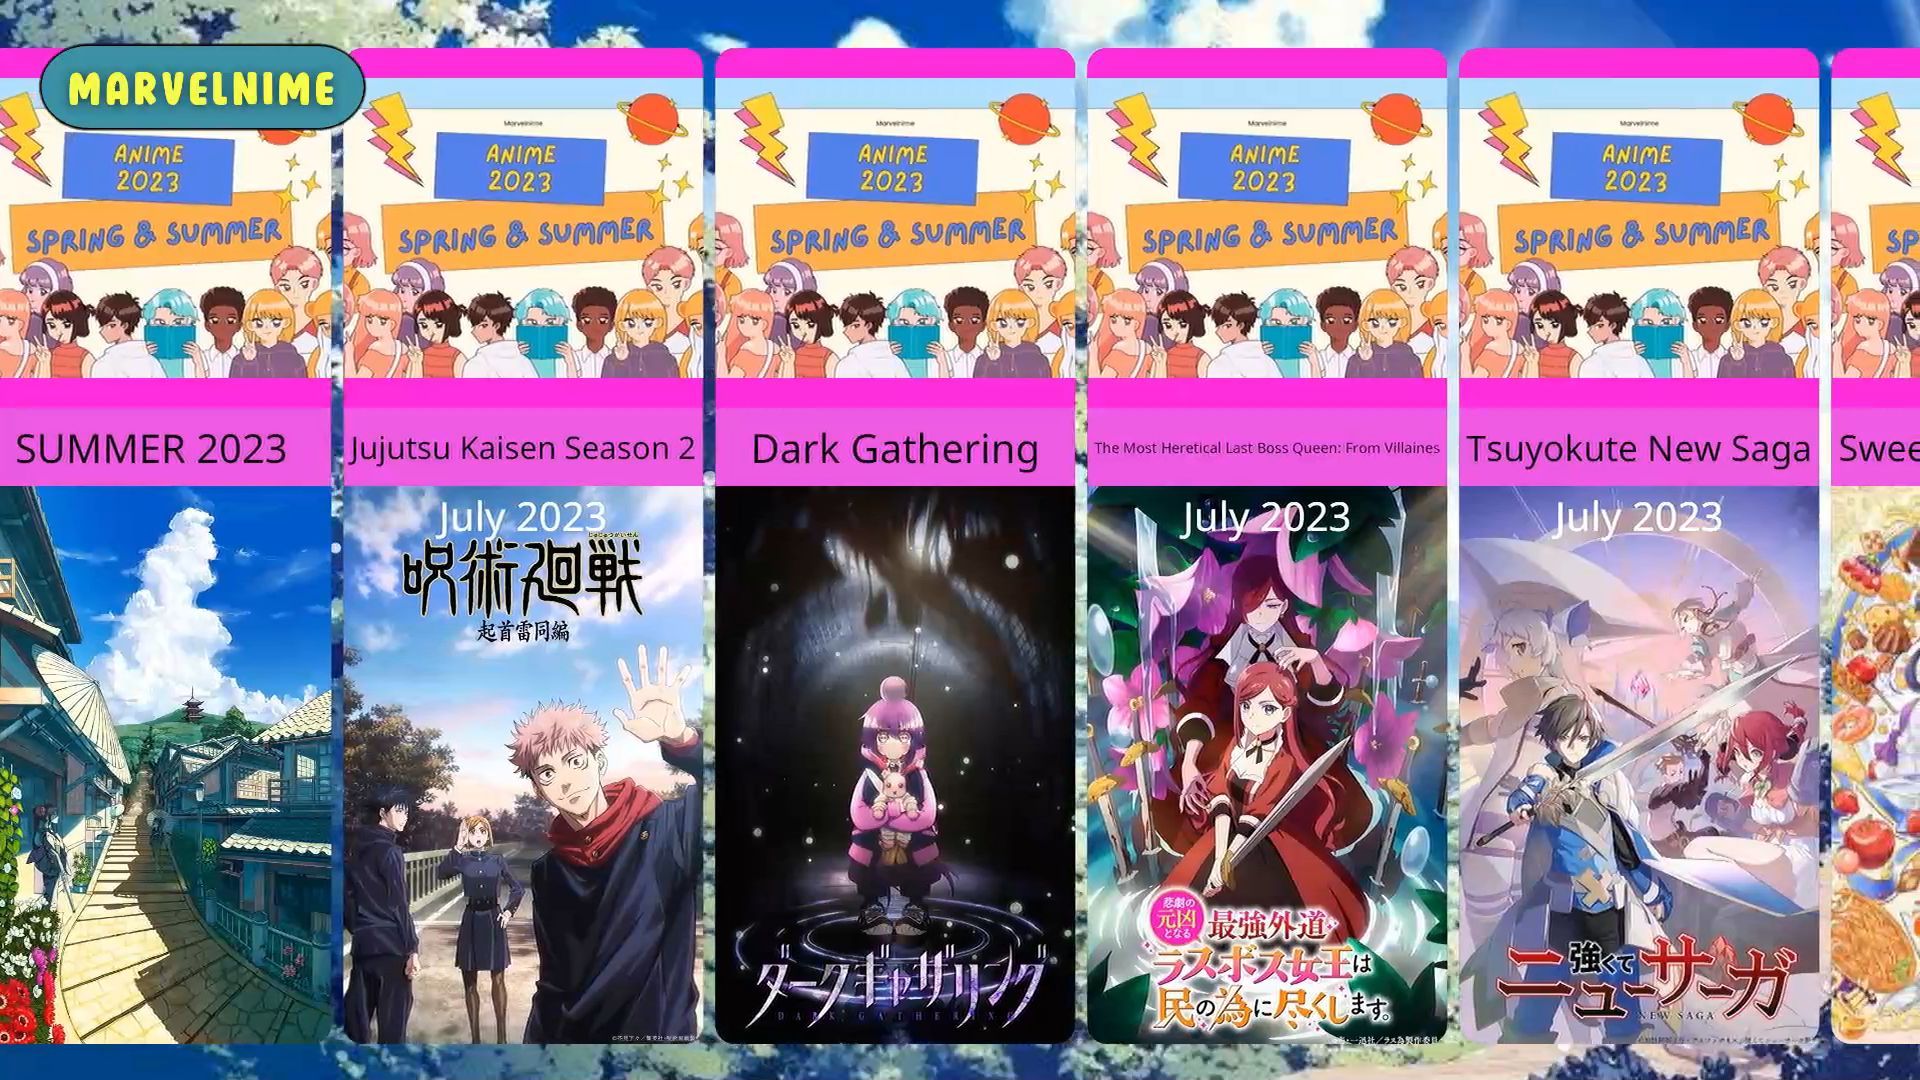 The Spring 2023 anime season releases and top 10 anime in Spring 2023